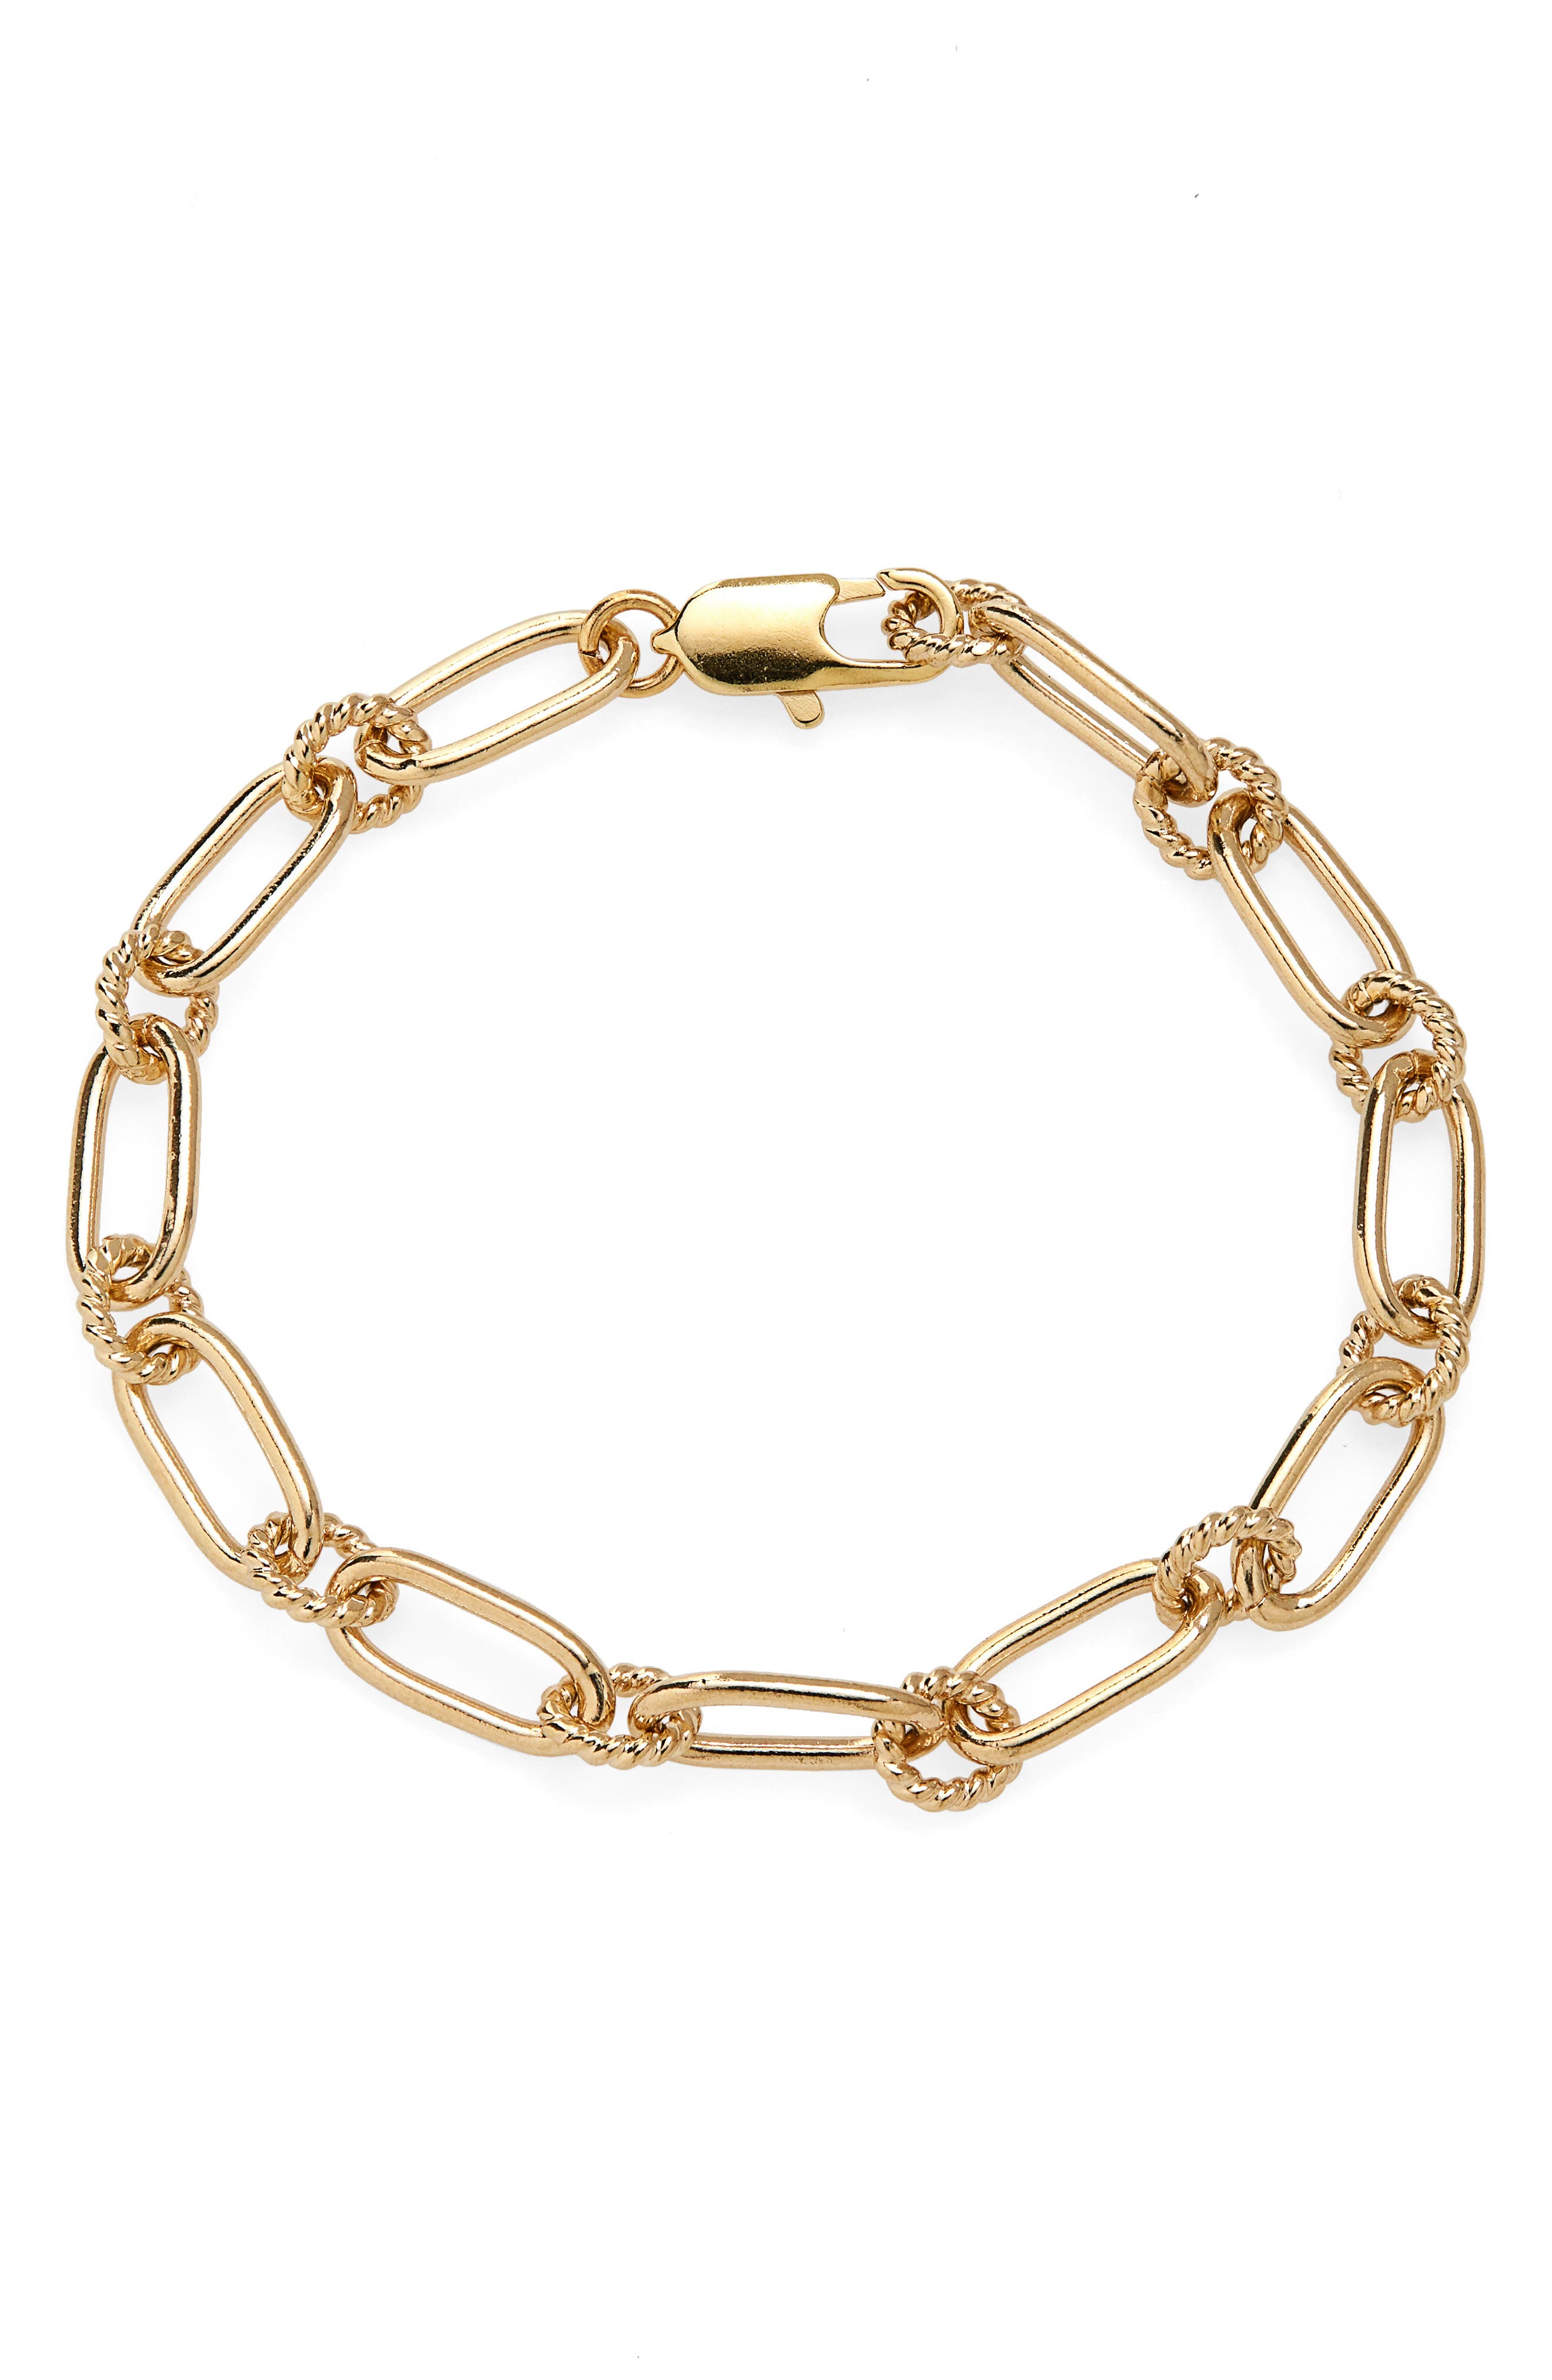 Laura Lombardi Braided Cable Link Bracelet in Brass at Nordstrom, Size 7 Us